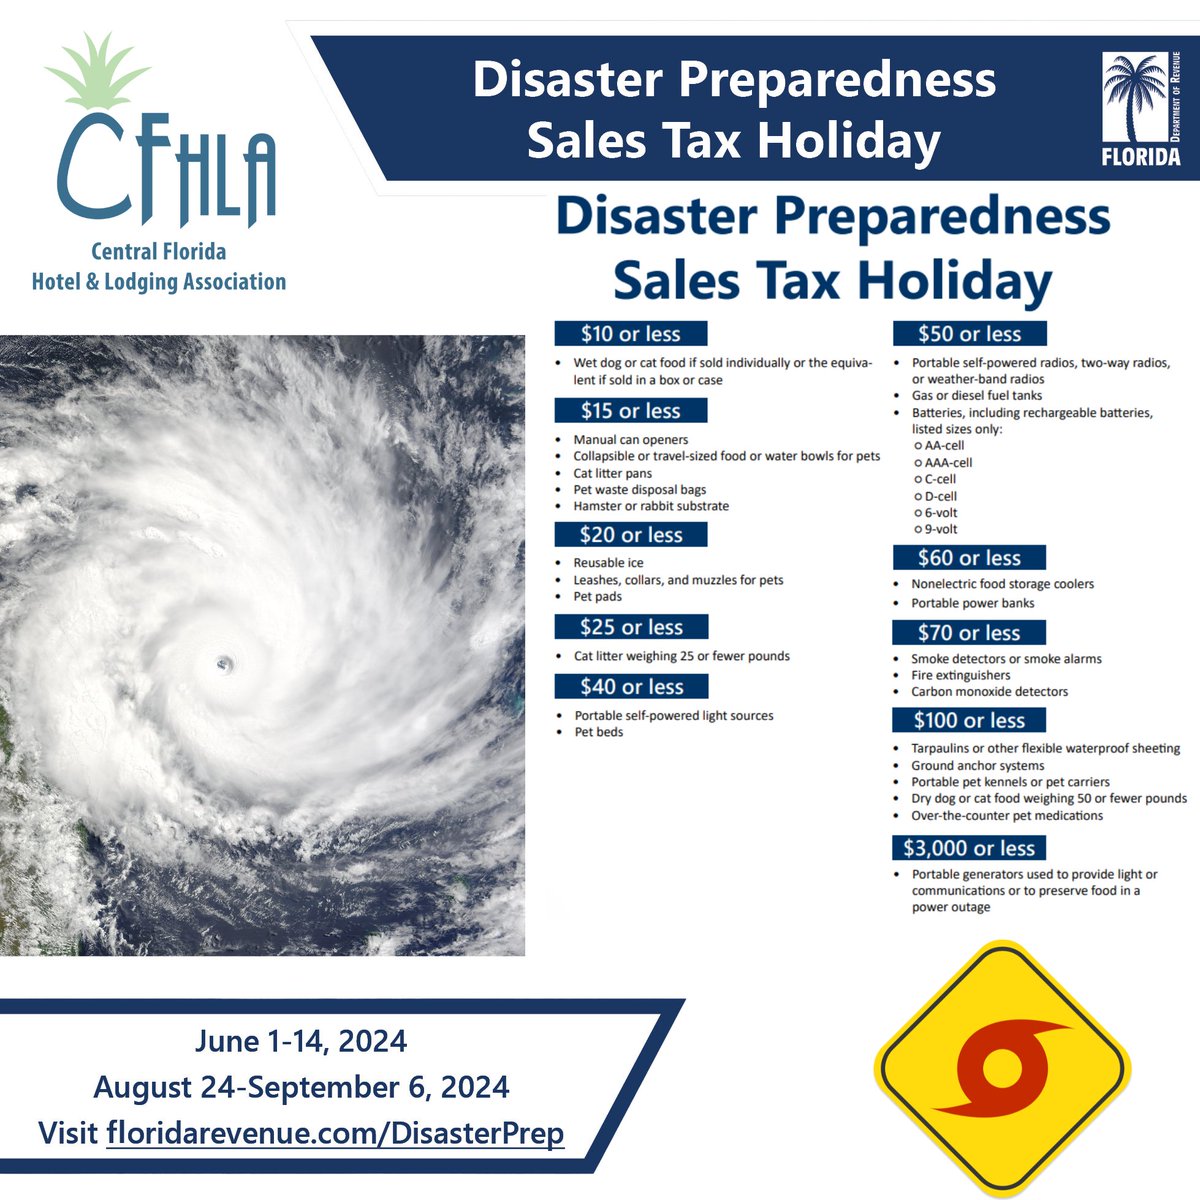 Reminder, the first 2024 Disaster Preparedness Sales Tax Holiday starts this weekend & will last until June 14. Now is the time to PLAN, PREPARE & SAVE MONEY on critical hurricane preparedness items!🌀🚨For more info: FloridaRevenue.com/DisasterPrep #CFHLA #HospitalityStrong #BePrepared